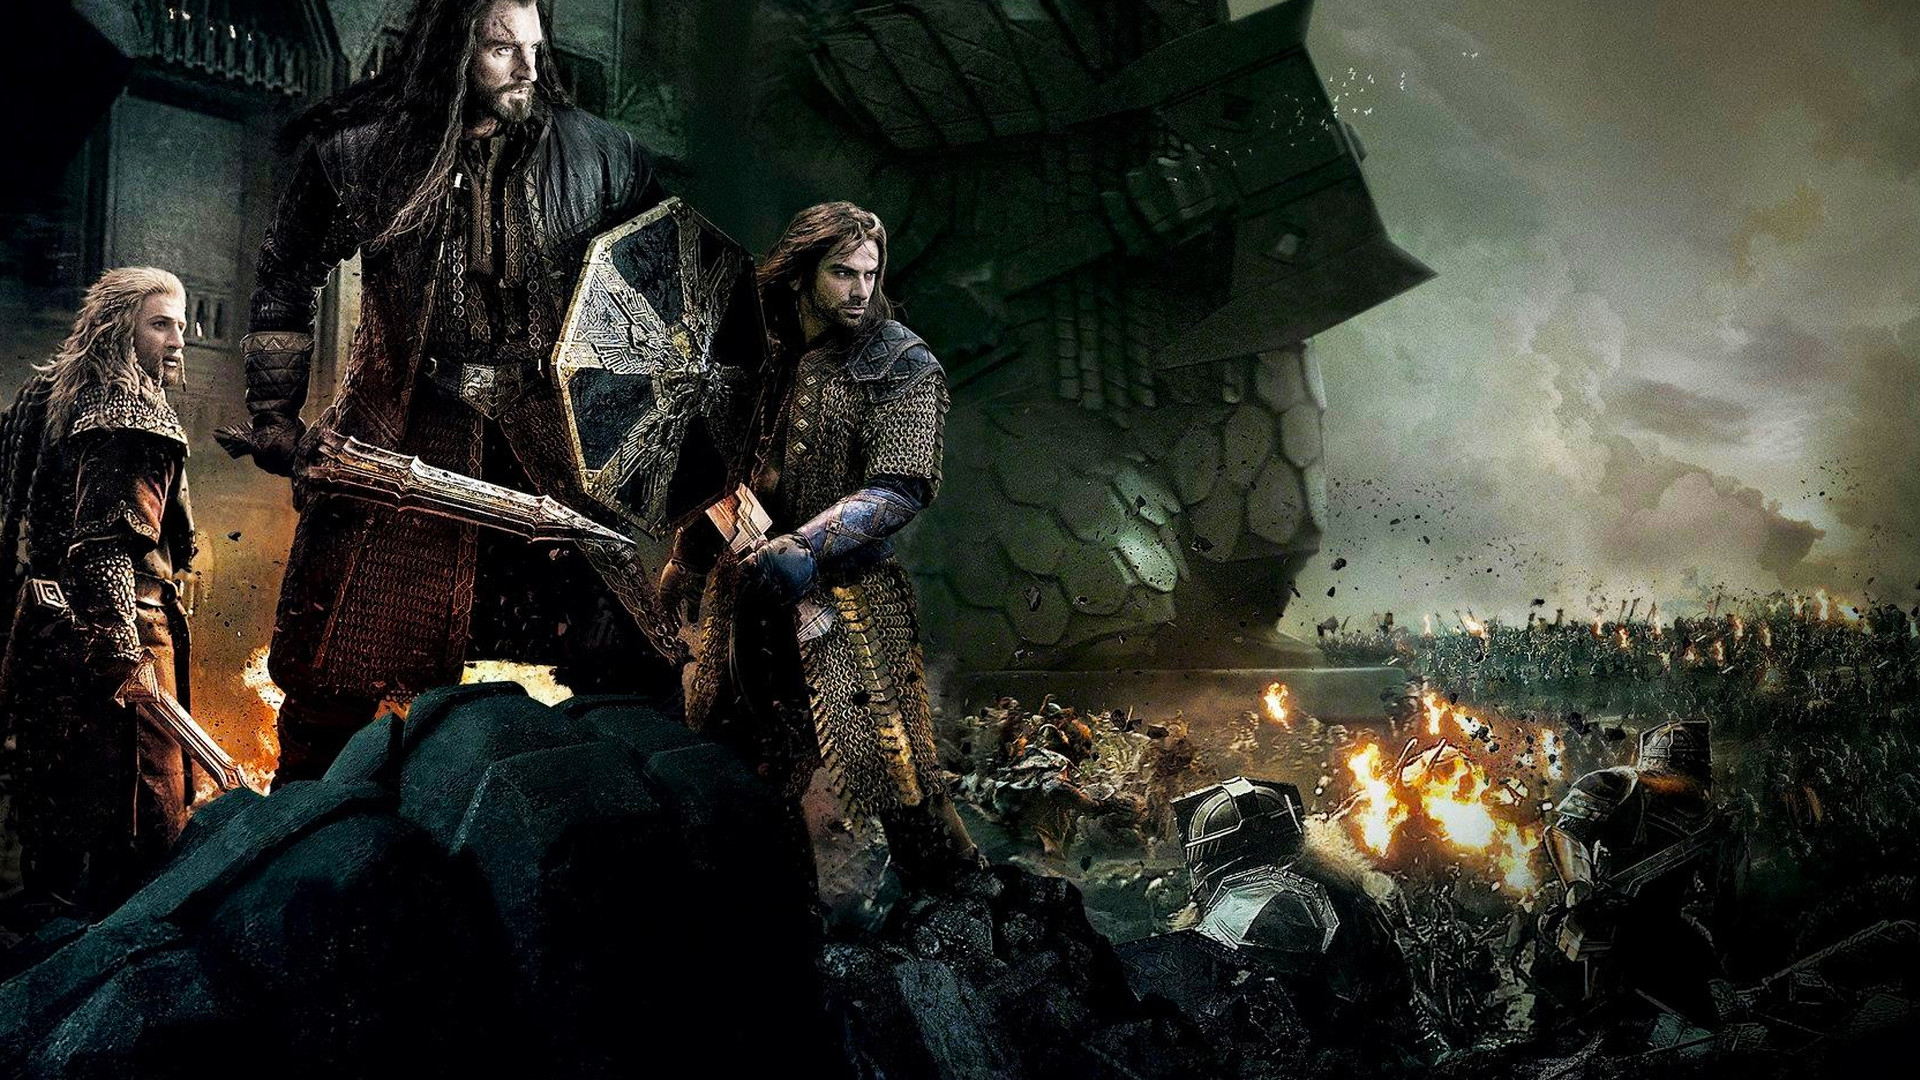 1920x1080 The Hobbit The Battle Of The Five Armies Backgrounds As Wallpaper HD